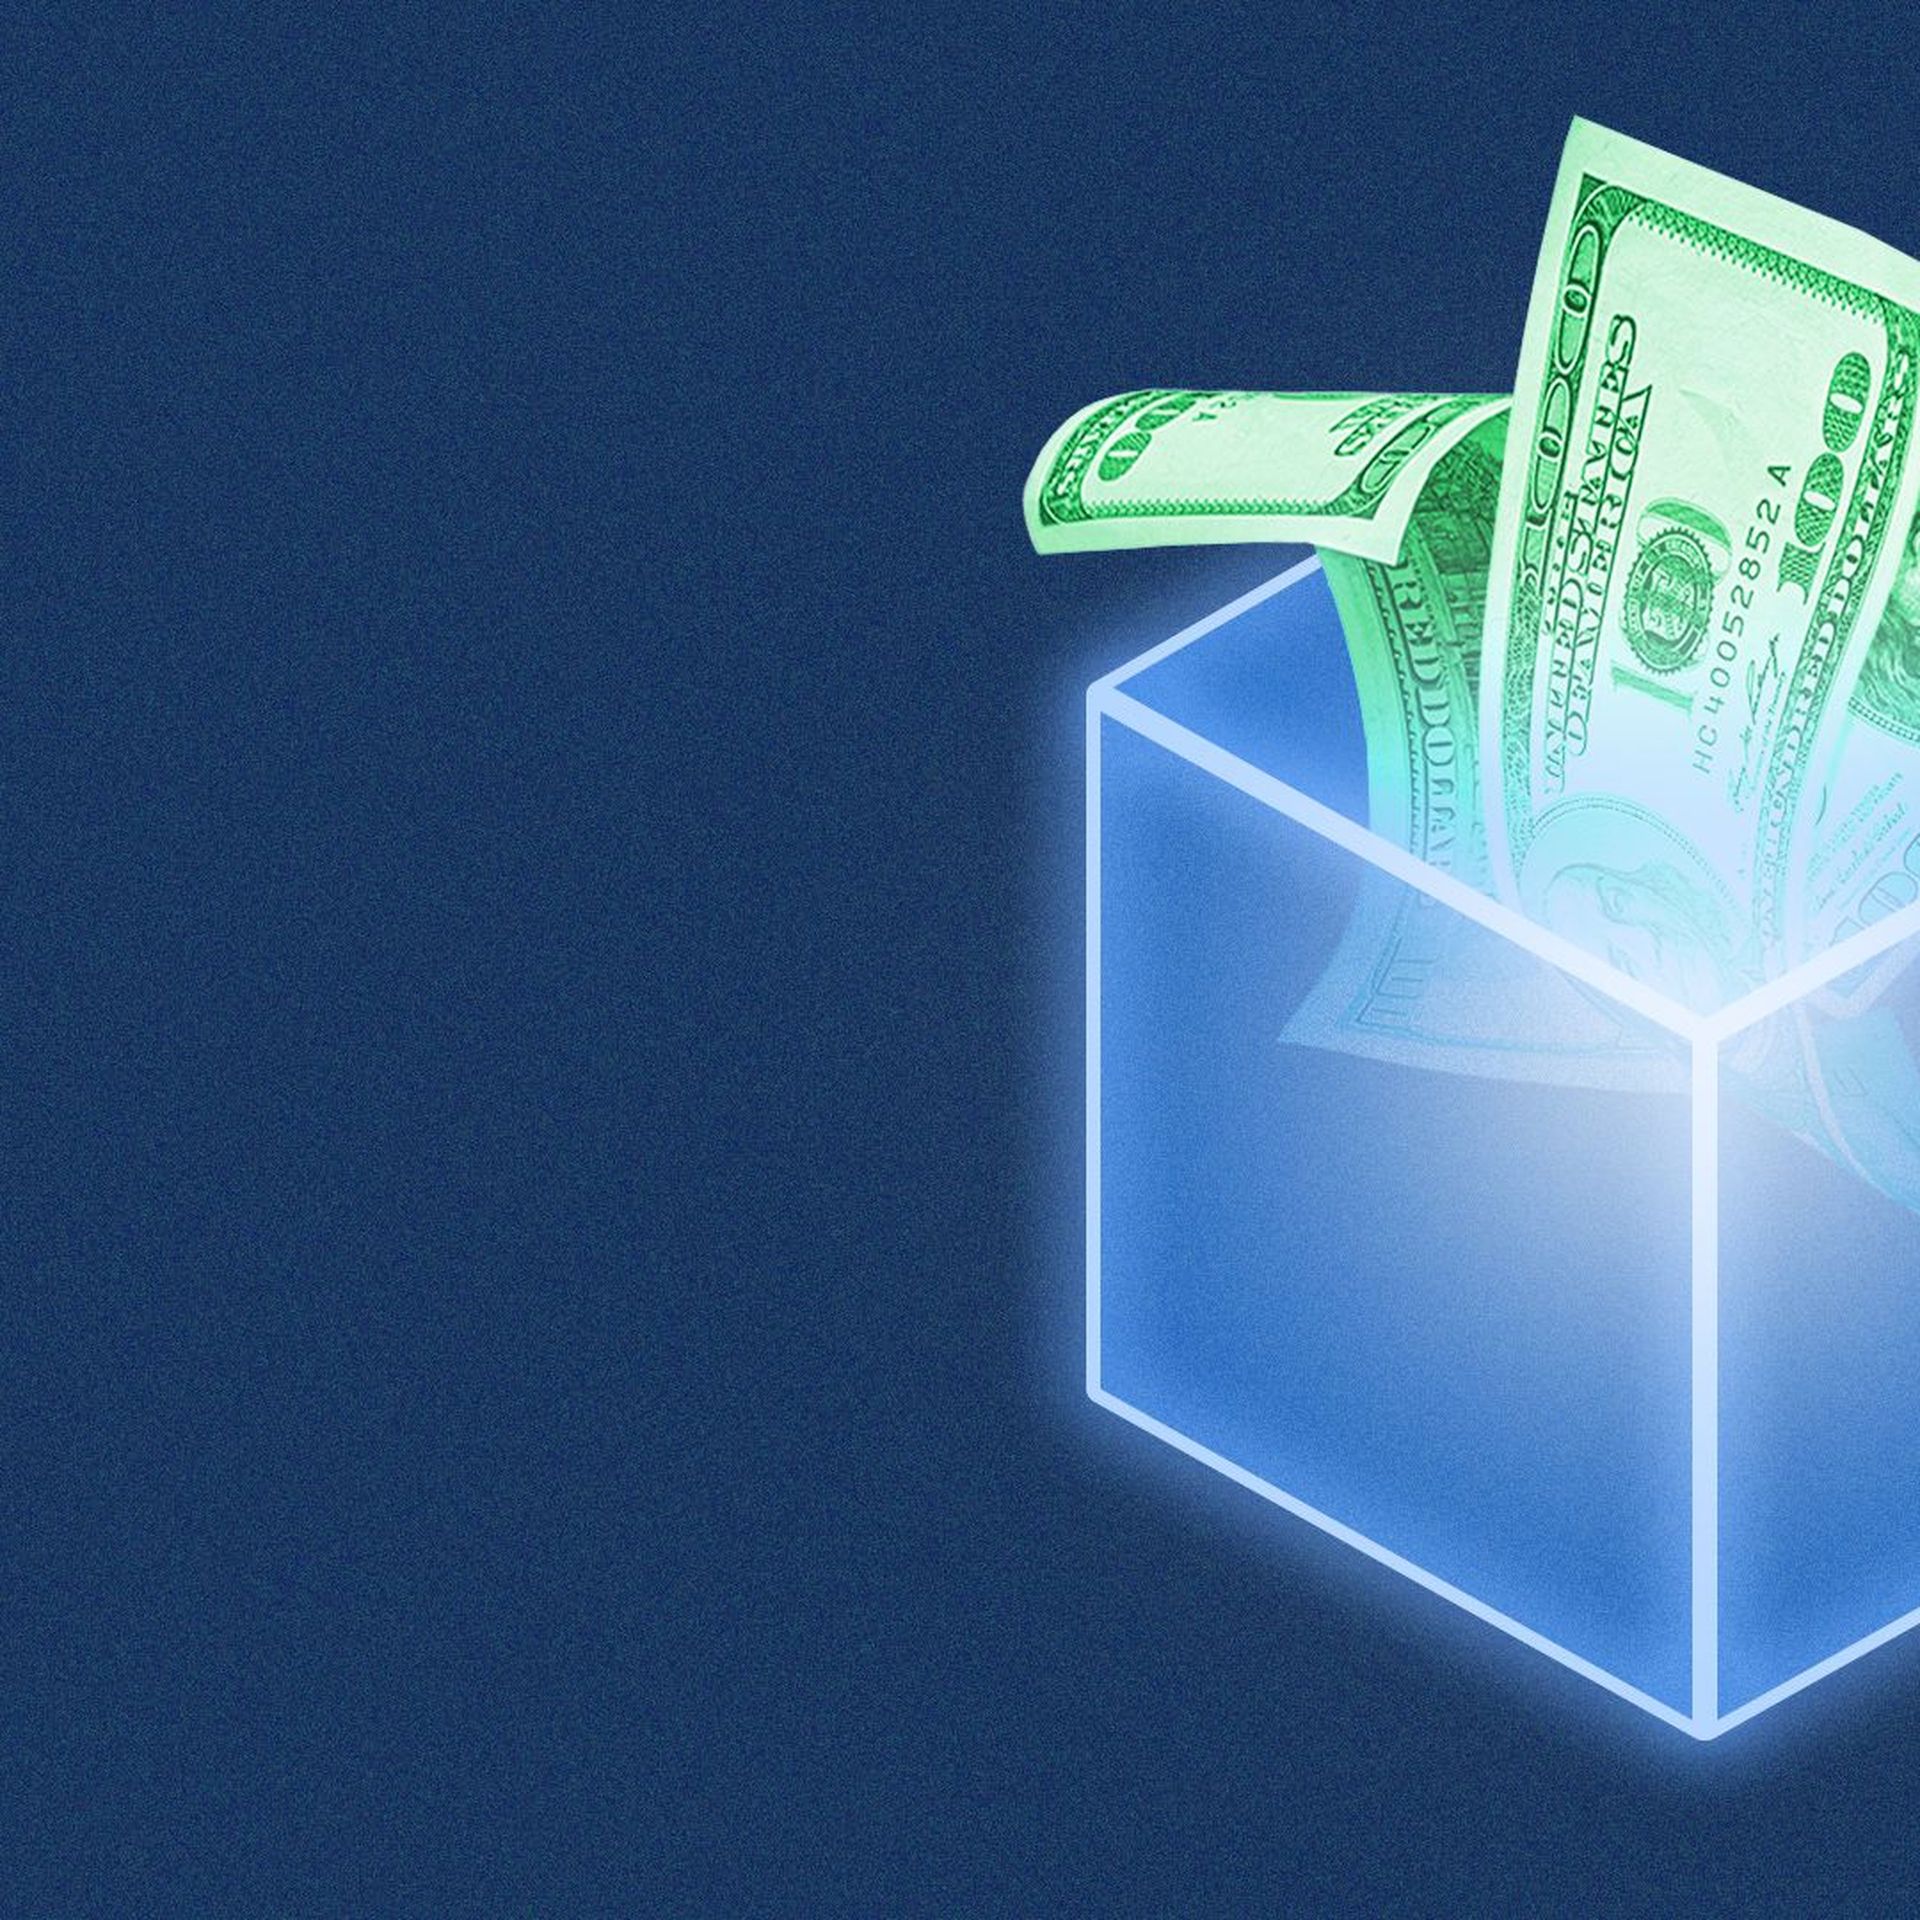 Illustration of a glowing blockchain block with cash inside.